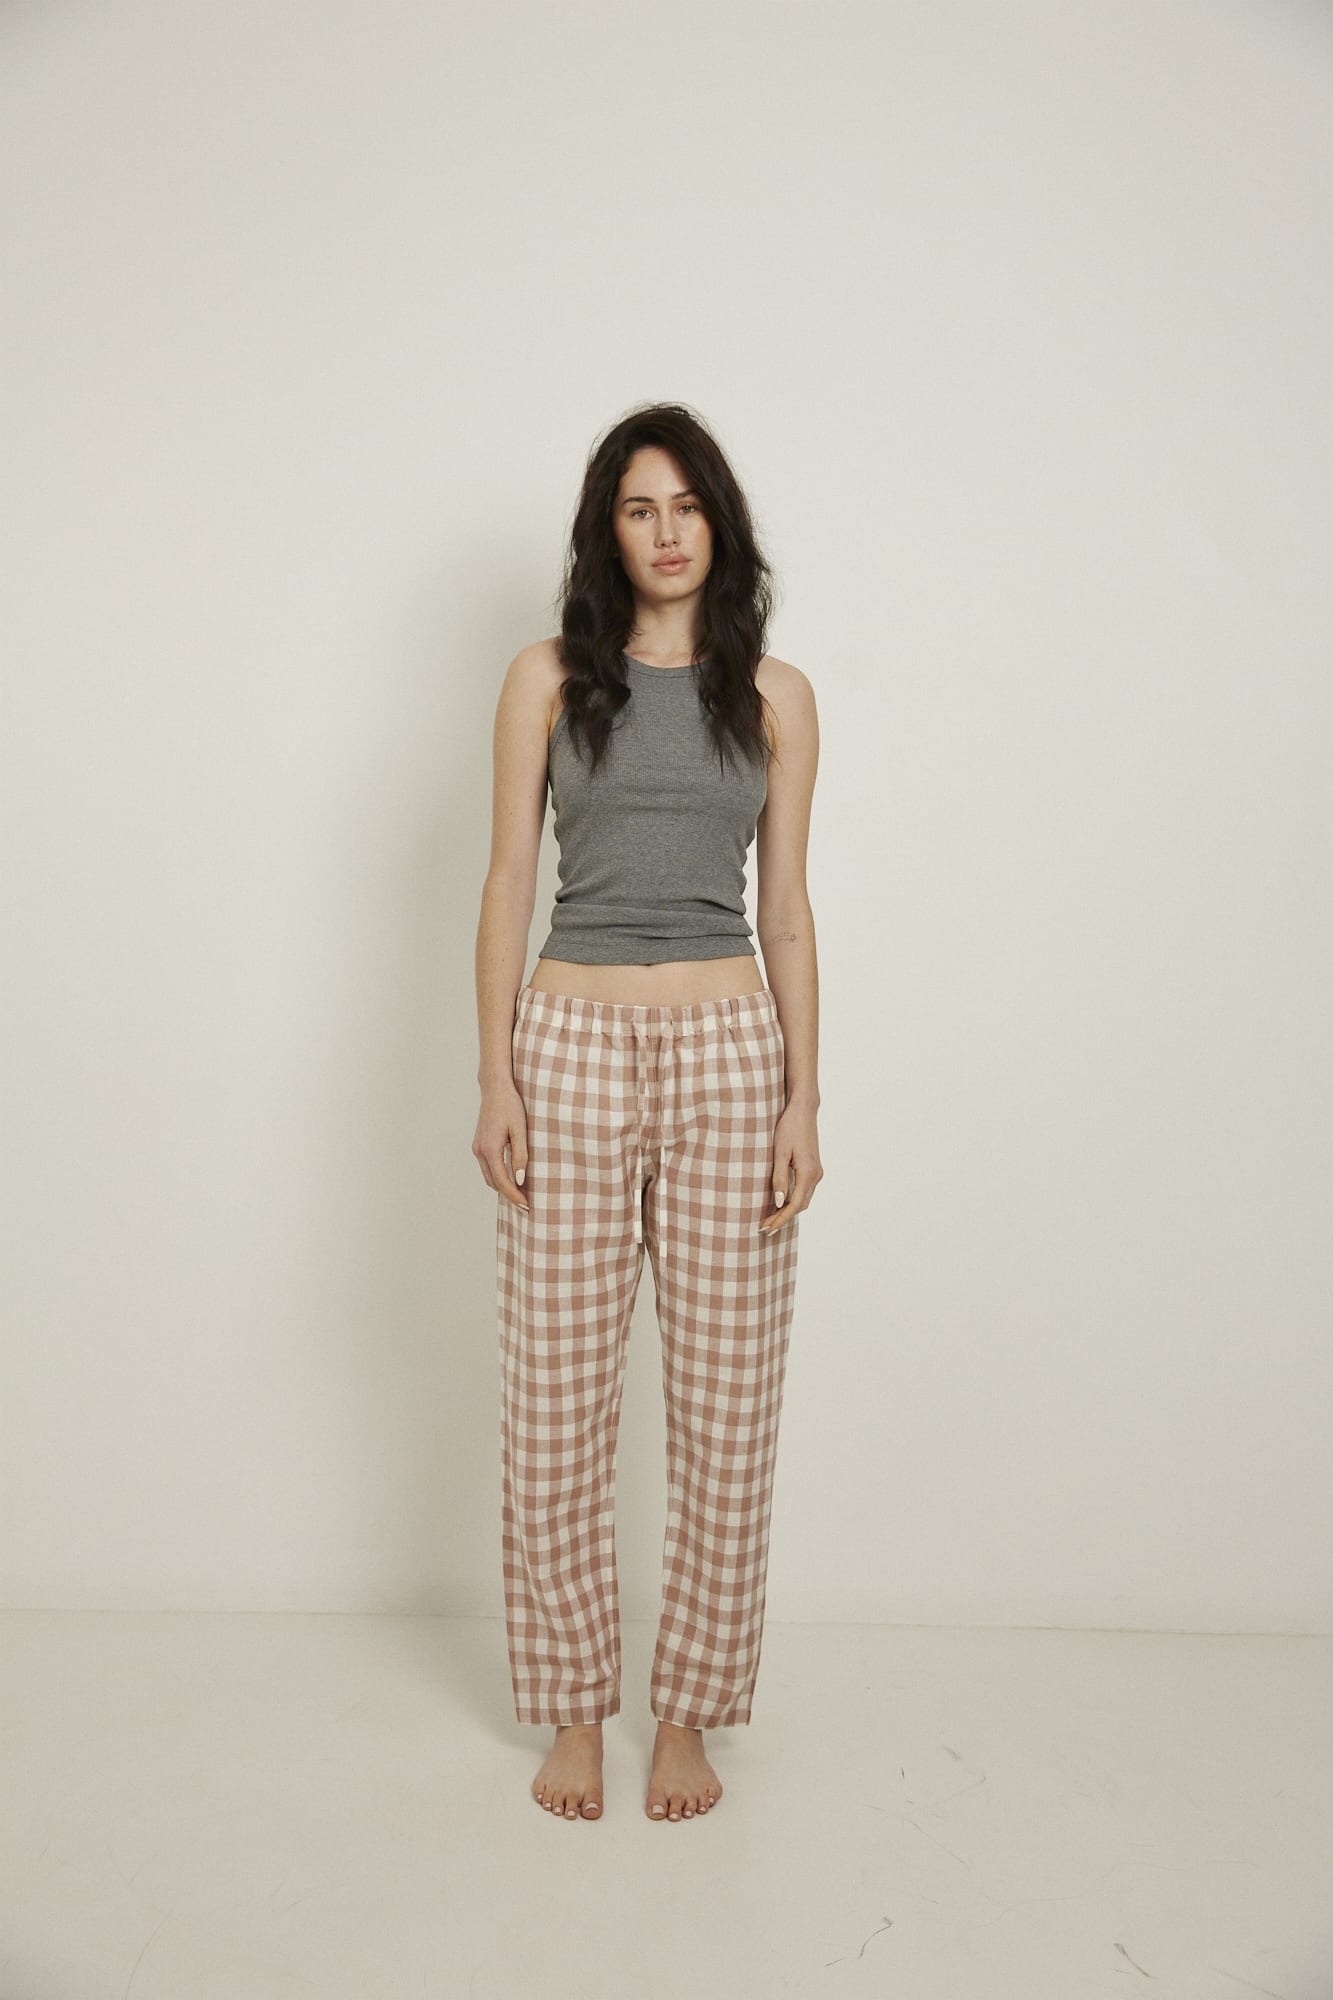 Women’s pyjama pant.  Made from an organic cotton and linen blend, in a pink and white check.  These pants feature an elasticated waistband with a drawstring for comfort.